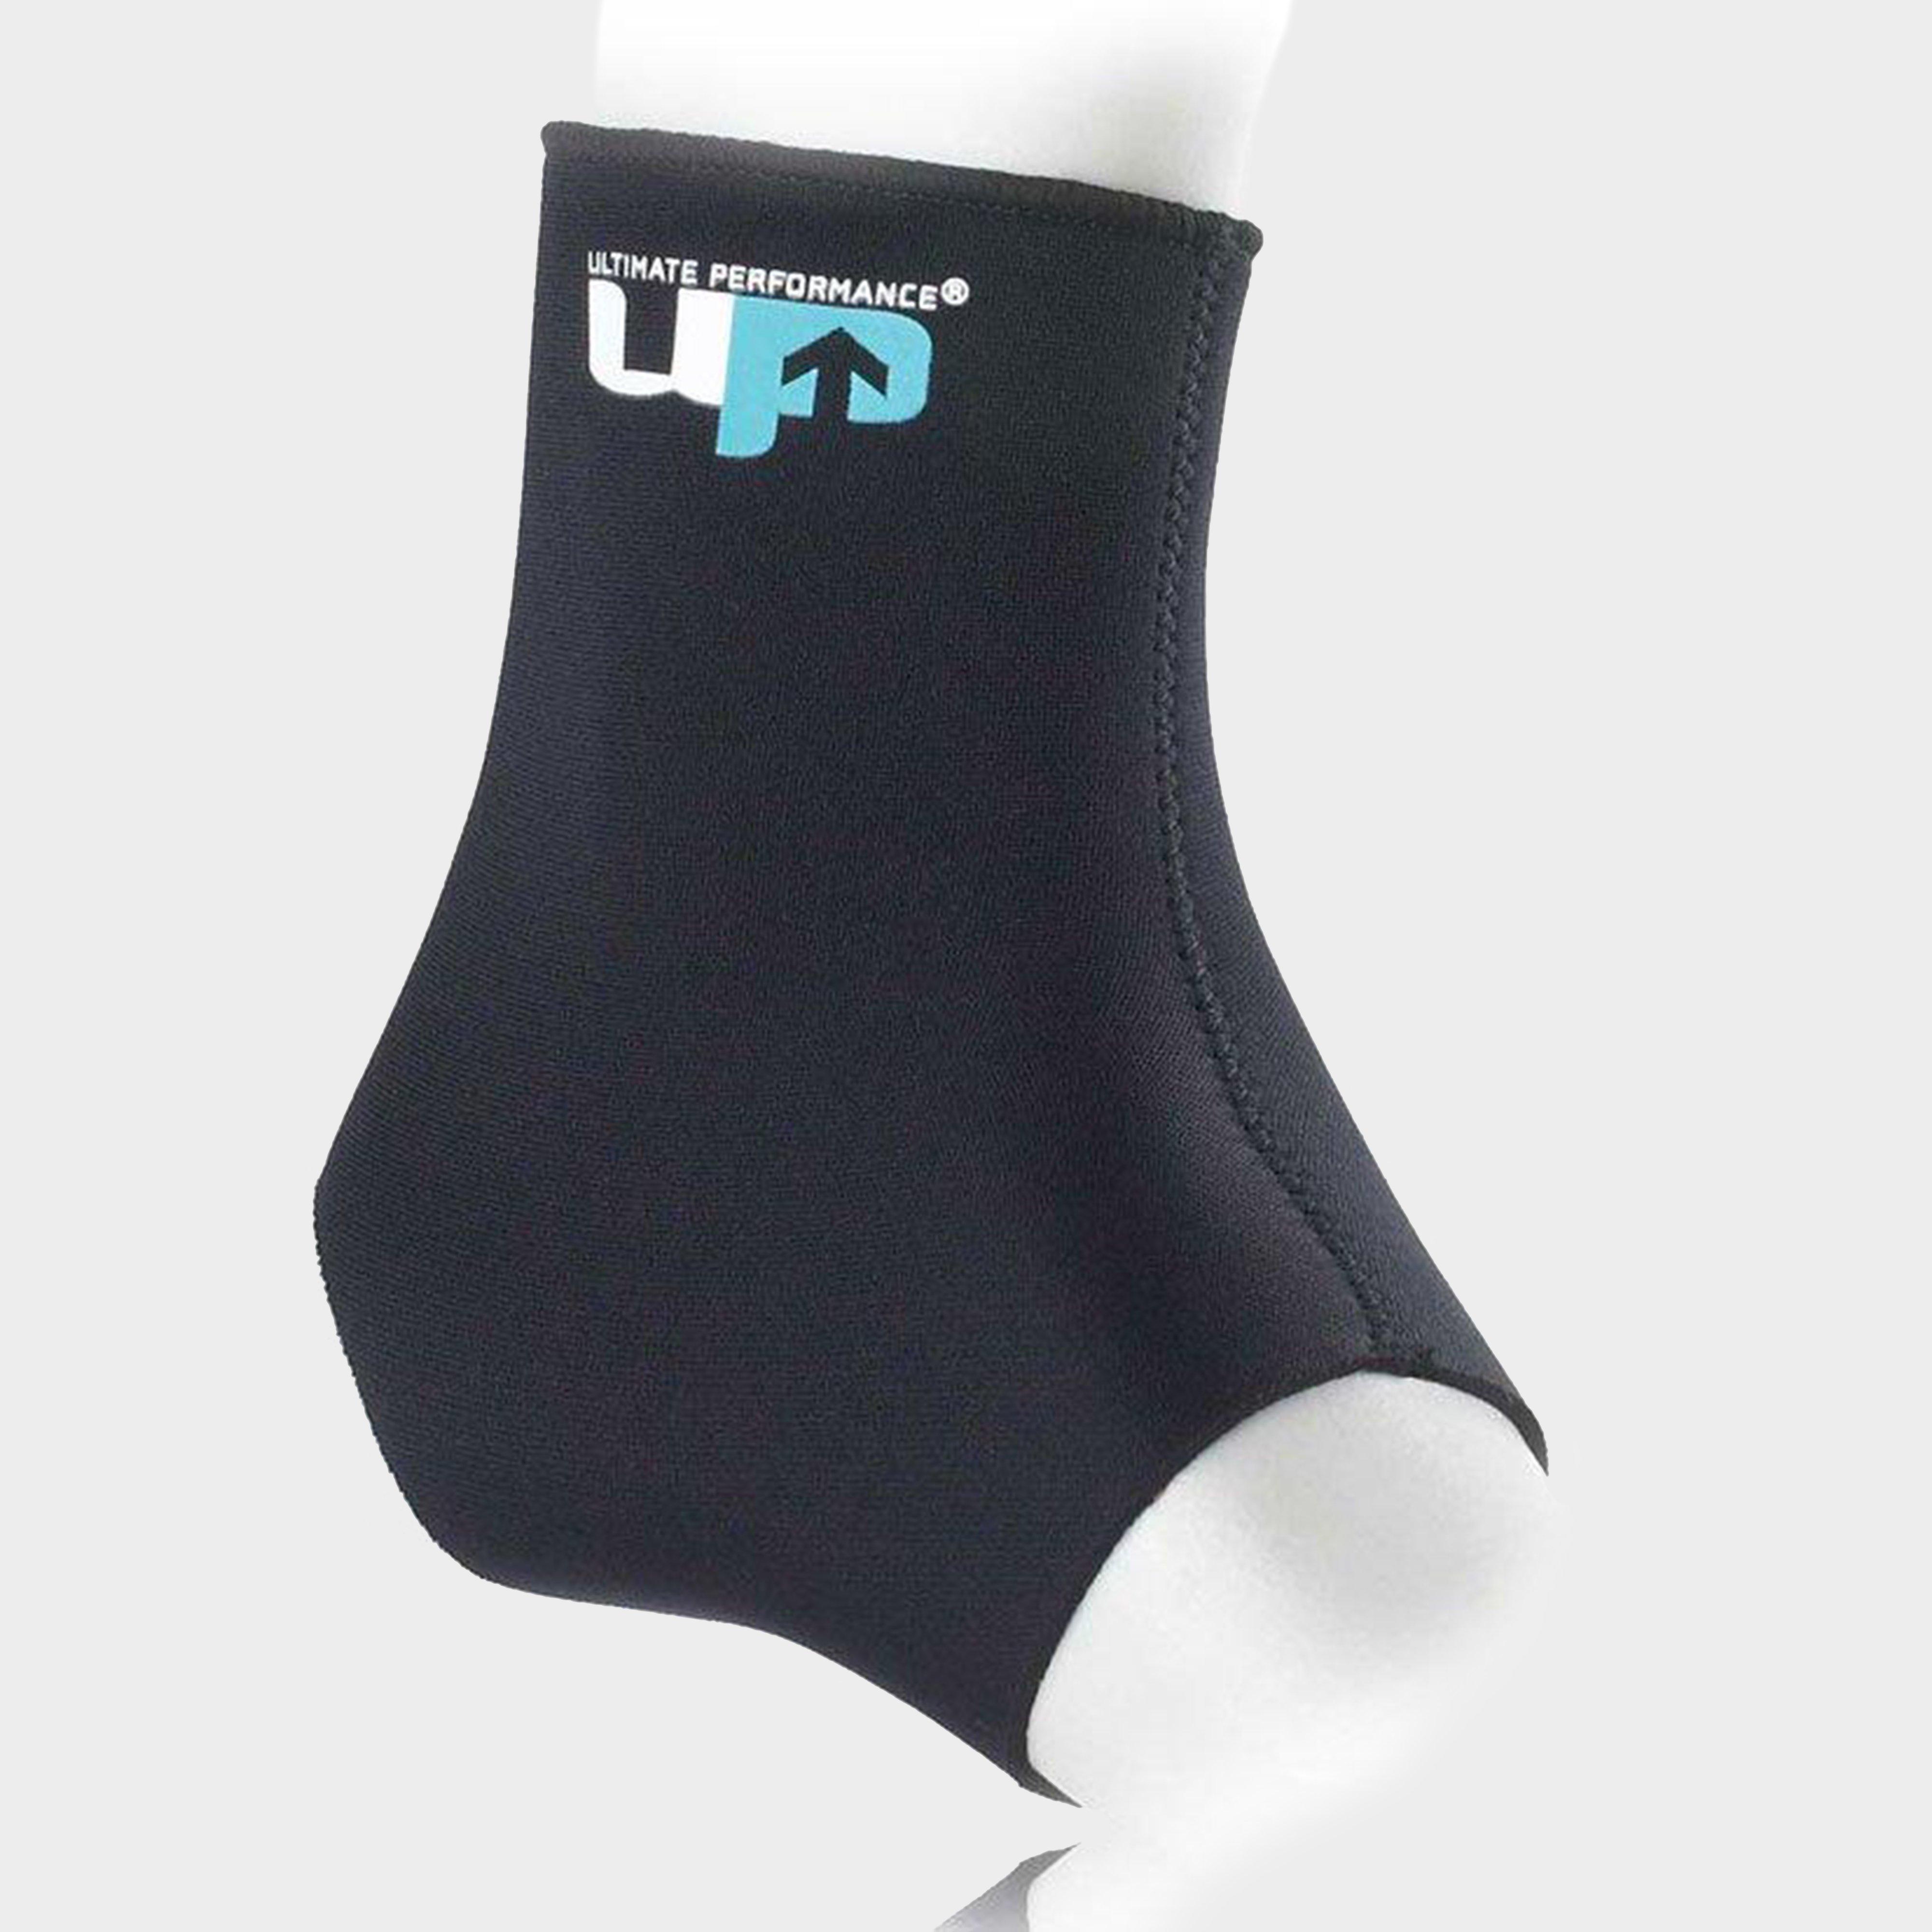 Ultimate Performance Neoprene Ankle Support - Black/support  Black/support